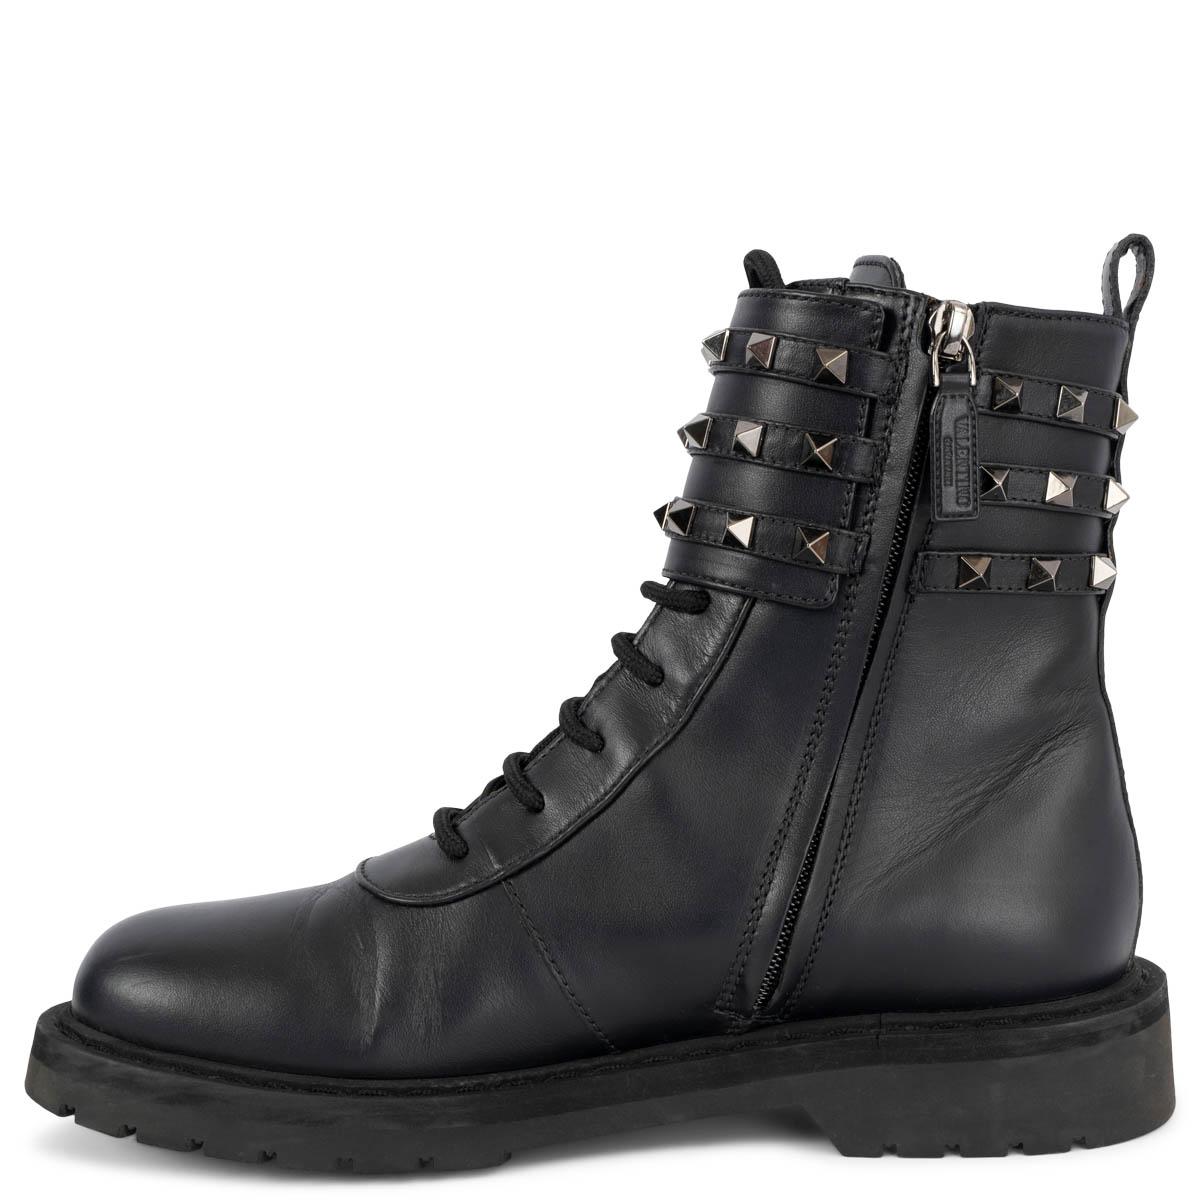 100% authentic Valentino Rockstud buckled combat boots in black smooth calfskin embellished with gunmetal studs. Open with concealed zip fastening along the inside and are set on a black rubber sole. Have been worn and are in excellent condition.